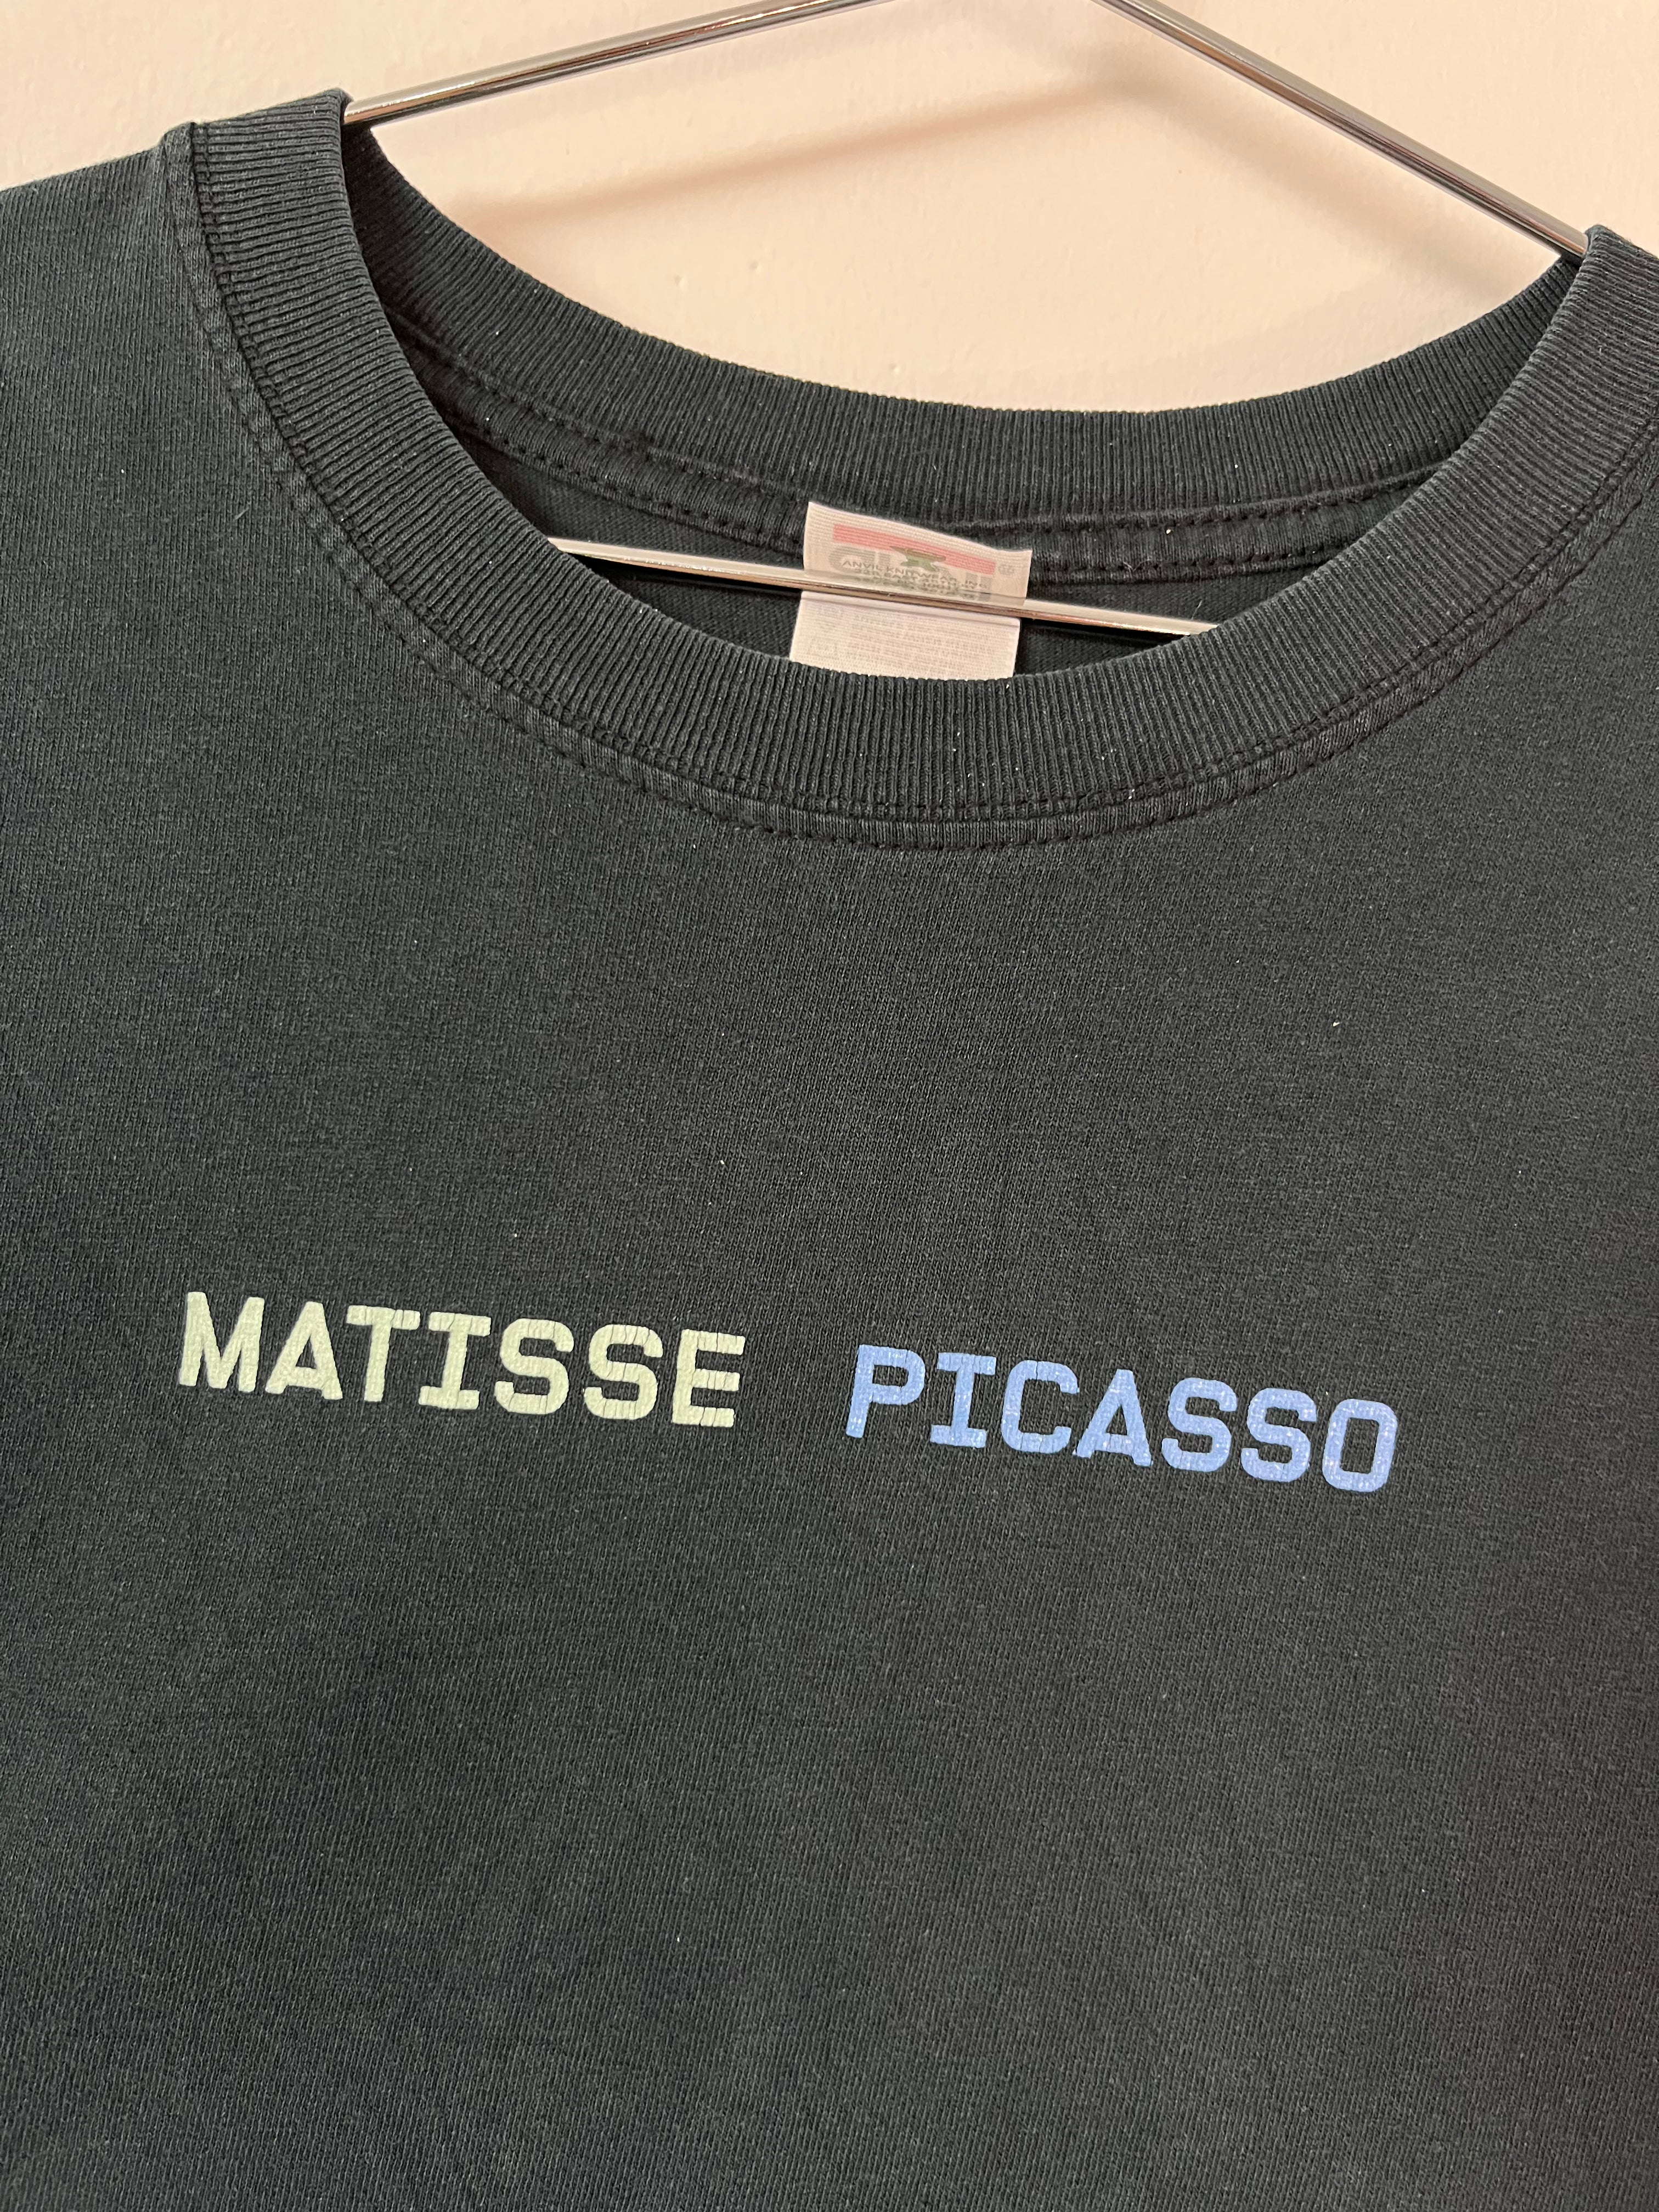 2003 Matisse Picasso MOMA Art T-Shirt - Faded Black - S